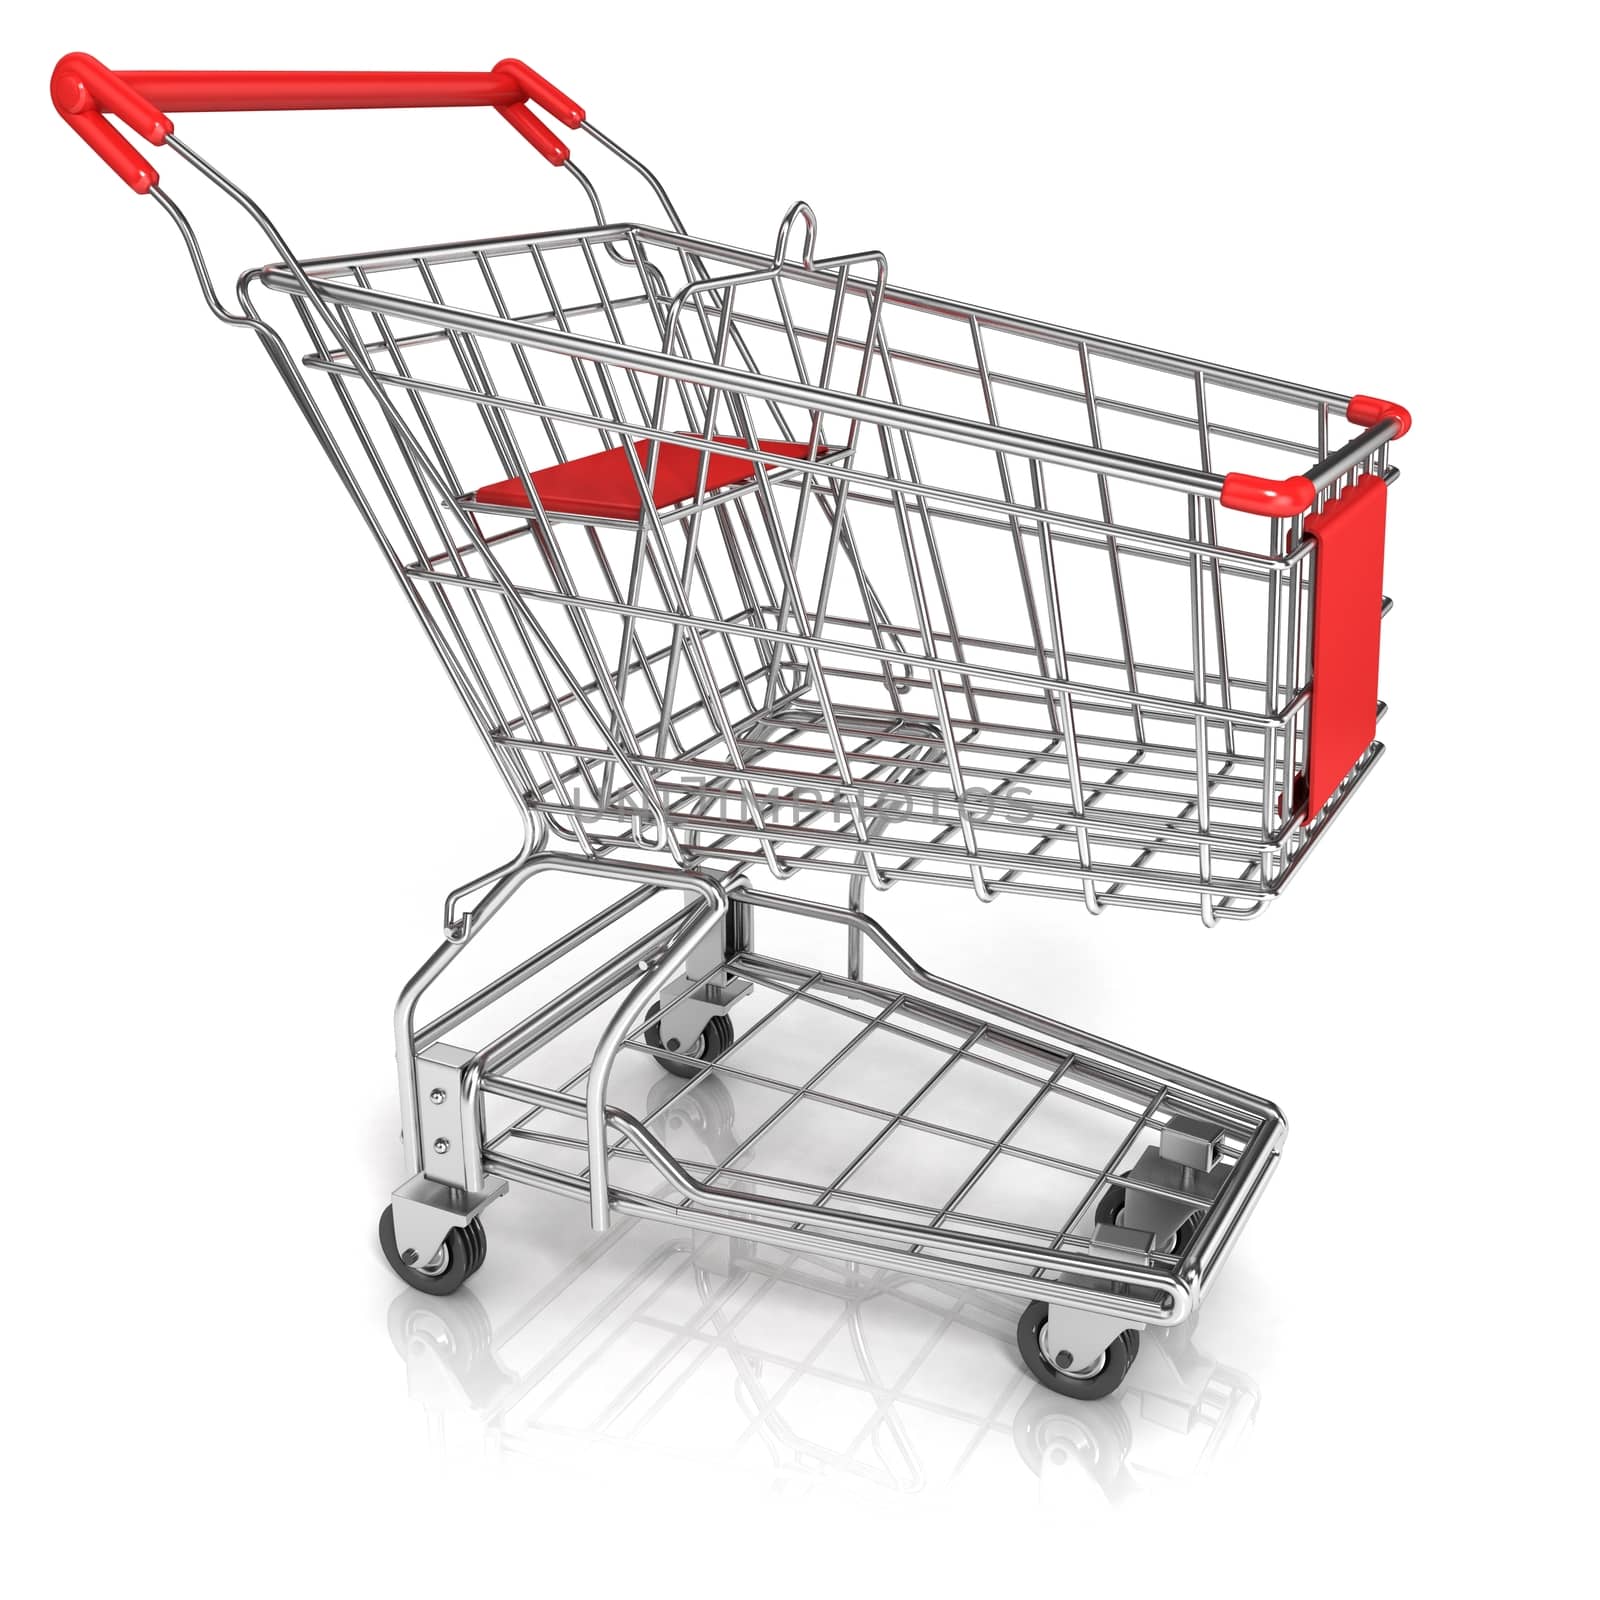 Shopping cart, isolated on white background. Side view